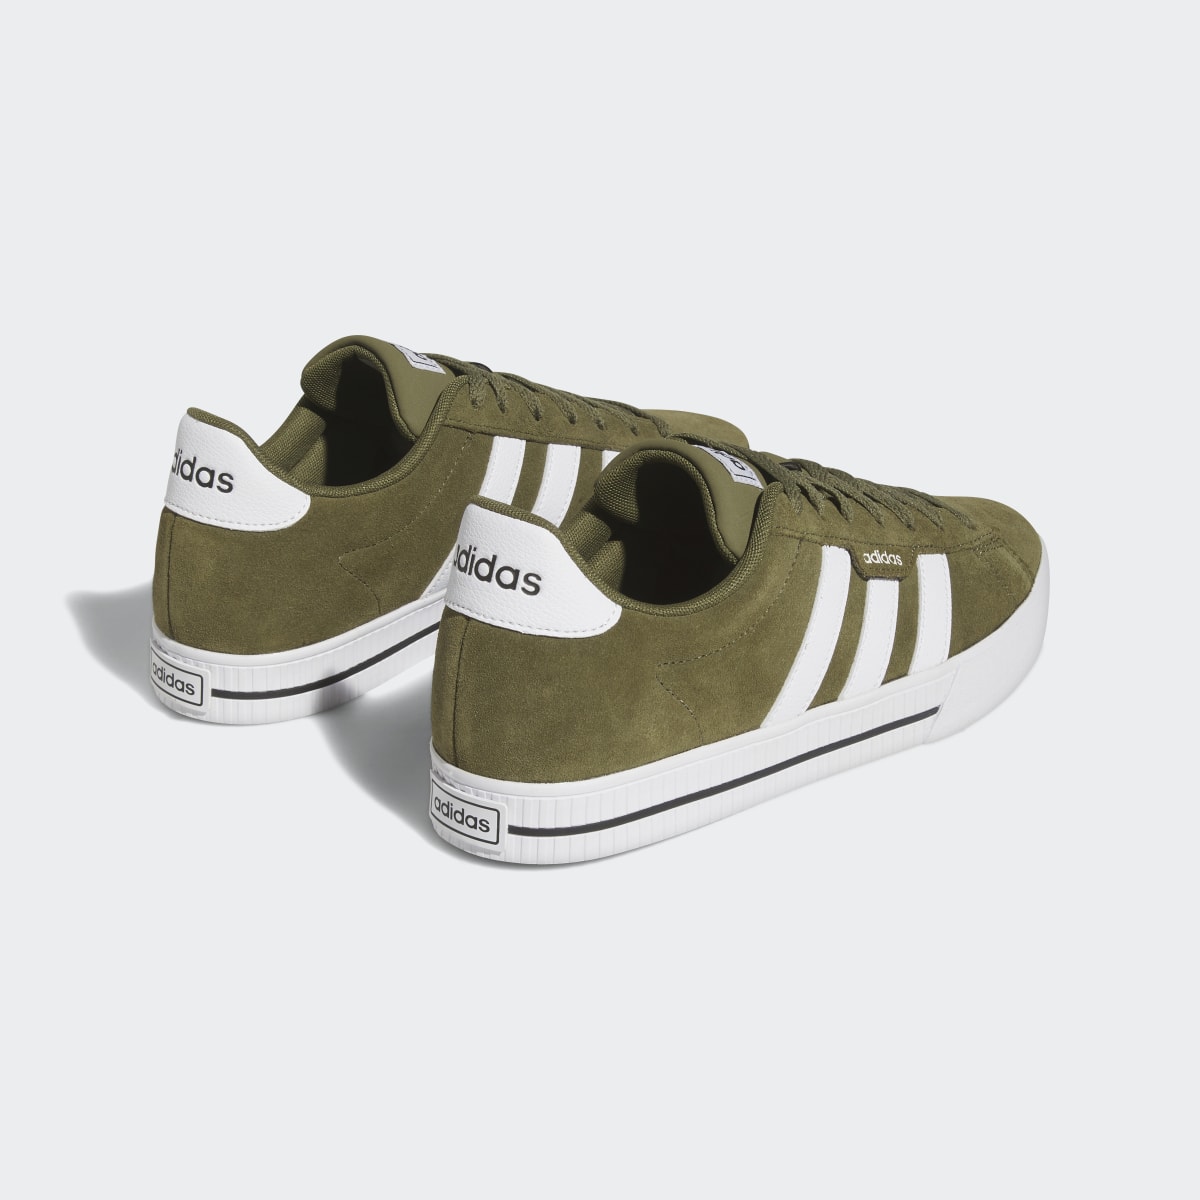 Adidas Daily 3.0 Shoes. 6